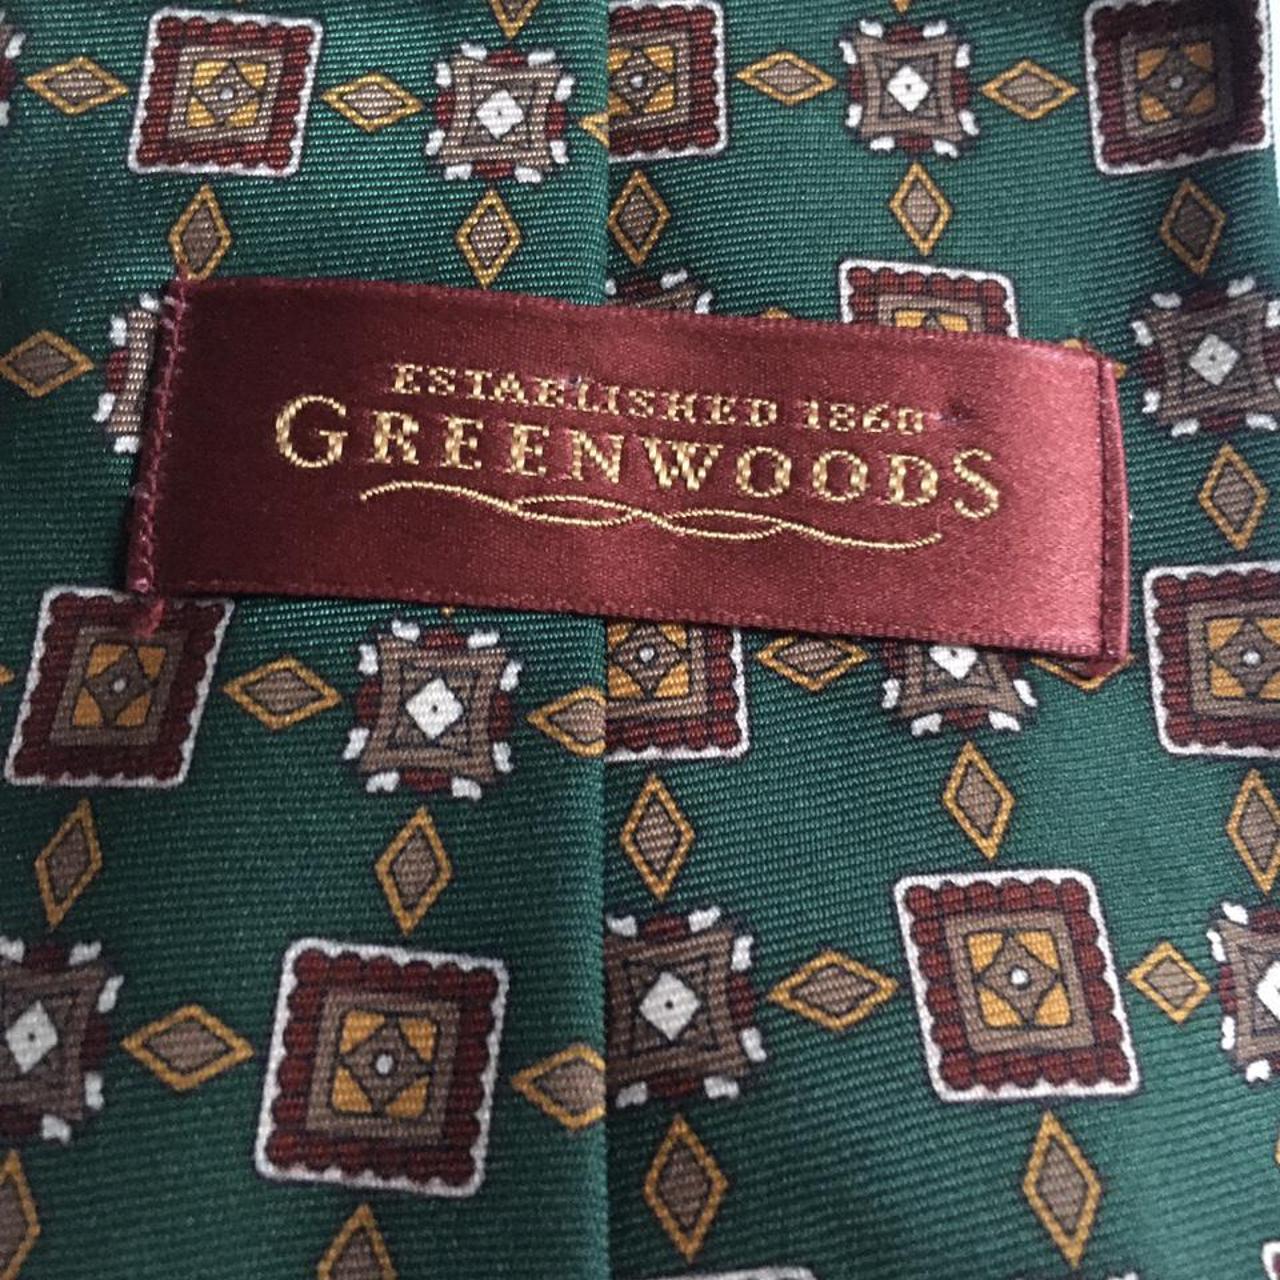 Product Image 2 - Vintage green tie from the